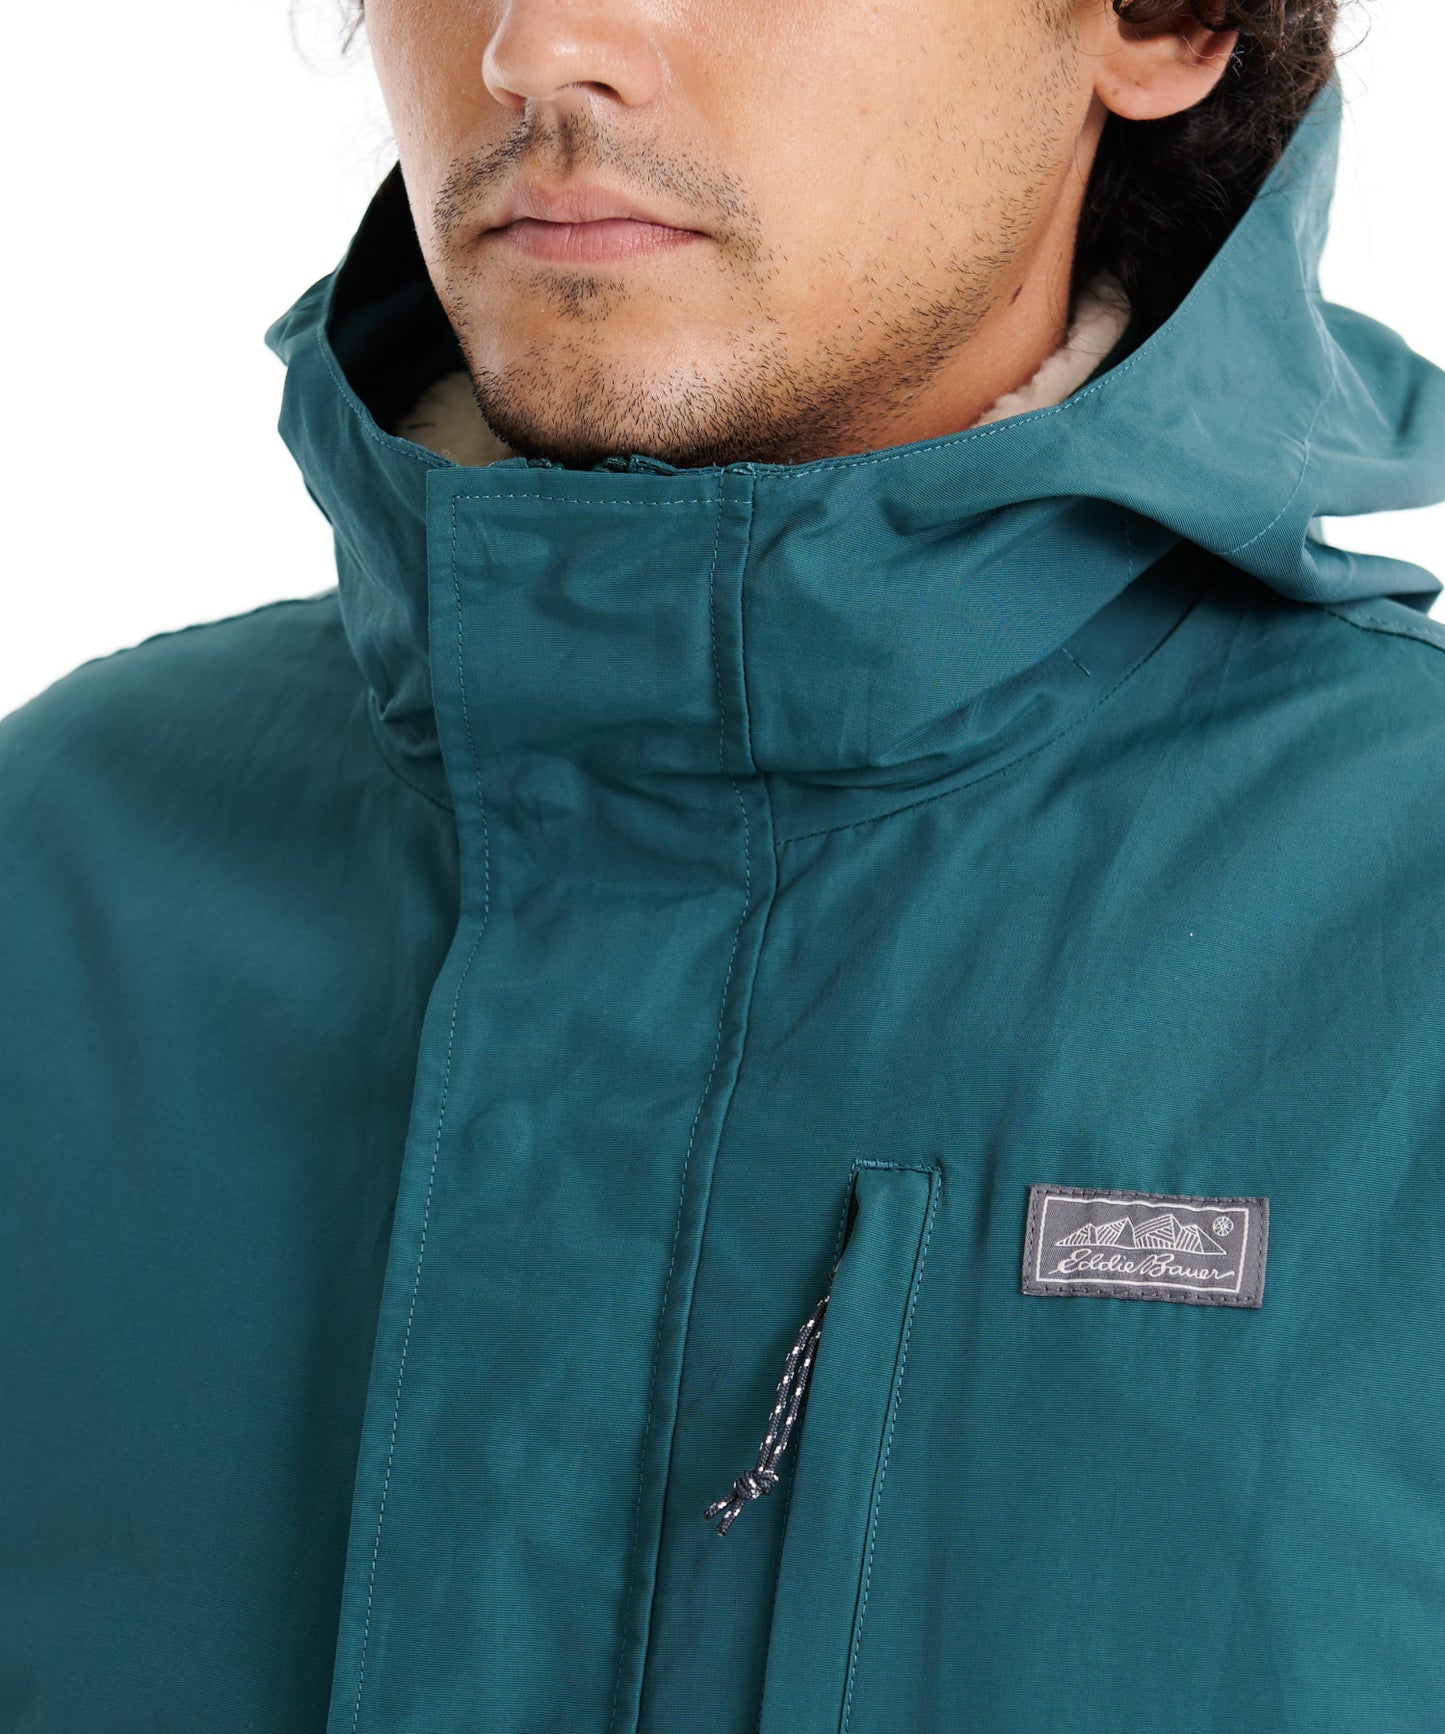 3 IN 1 マウンテンパーカー/3 in 1 MOUNTAIN PARKA